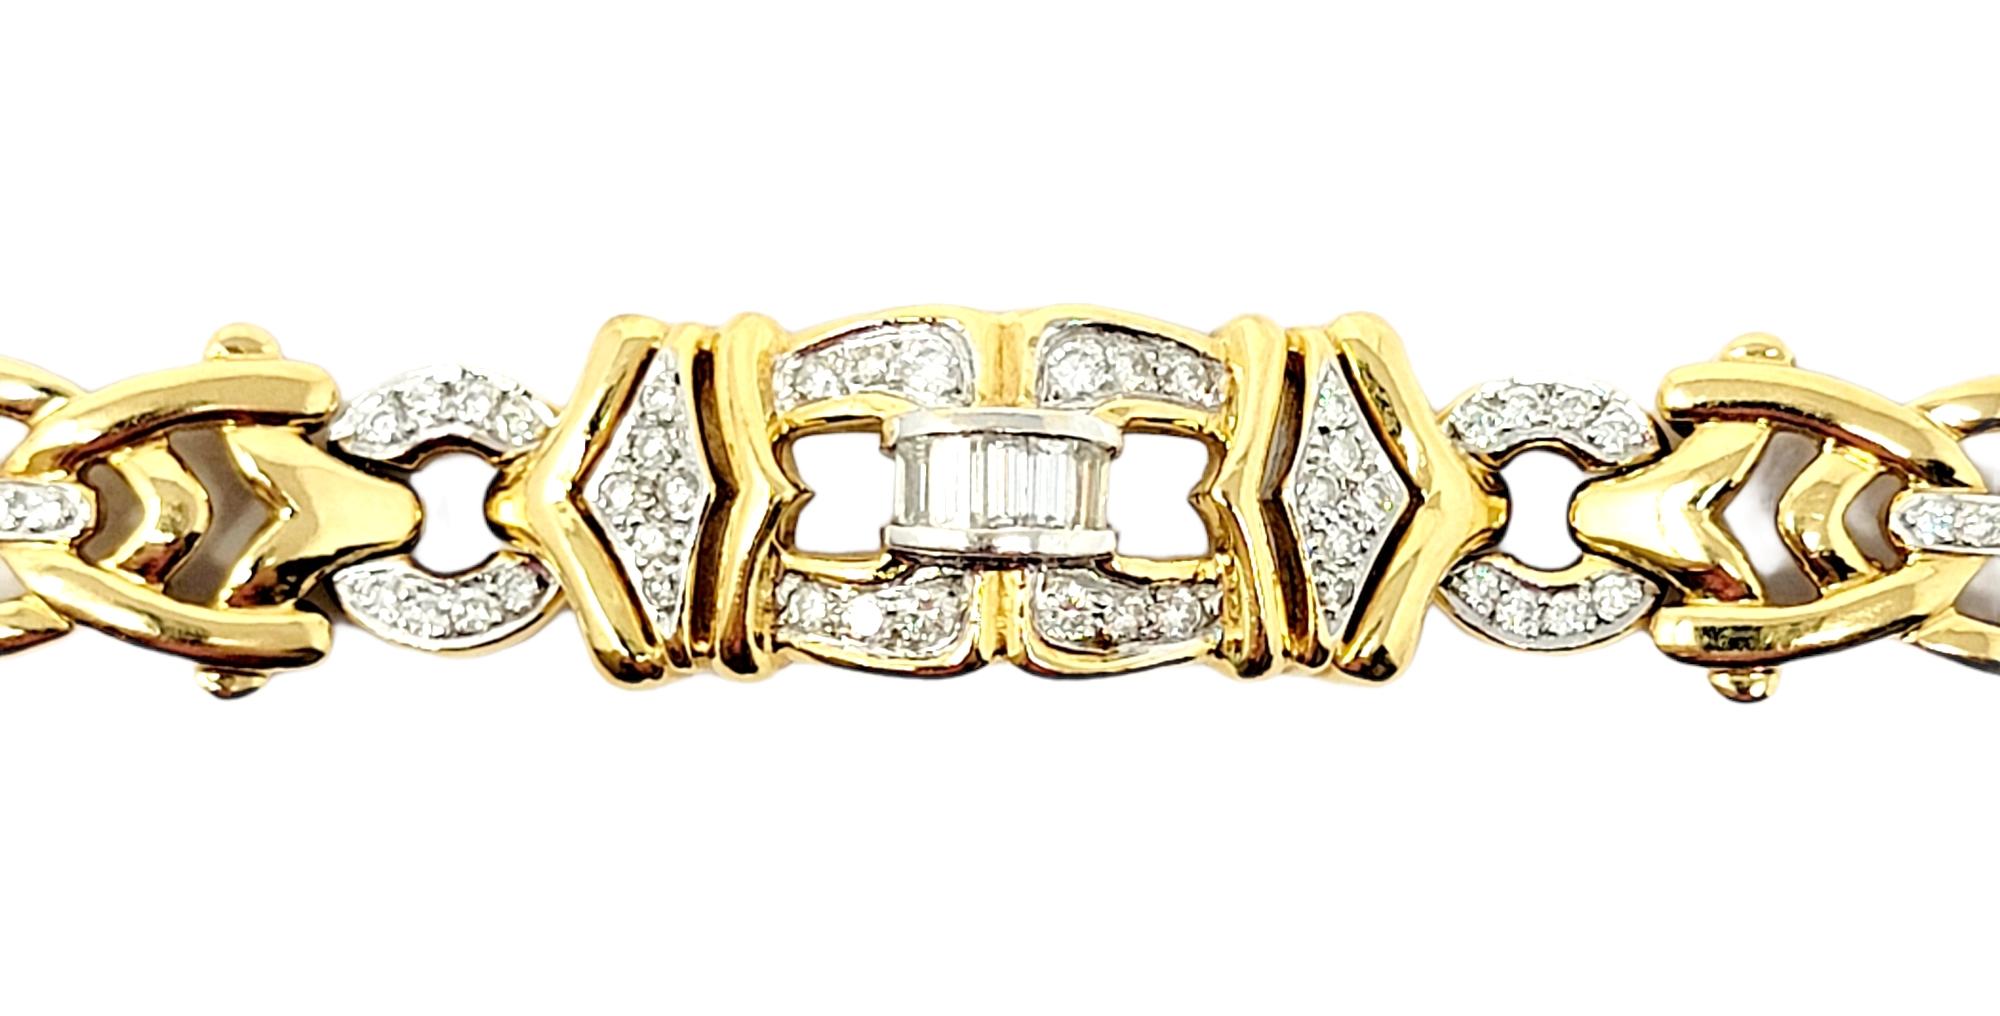 This absolutely gorgeous diamond and yellow gold bracelet exudes elegance and sophistication. This unique piece features assorted shaped polished 18 karat yellow gold open links throughout. The golden links are embellished with round brilliant